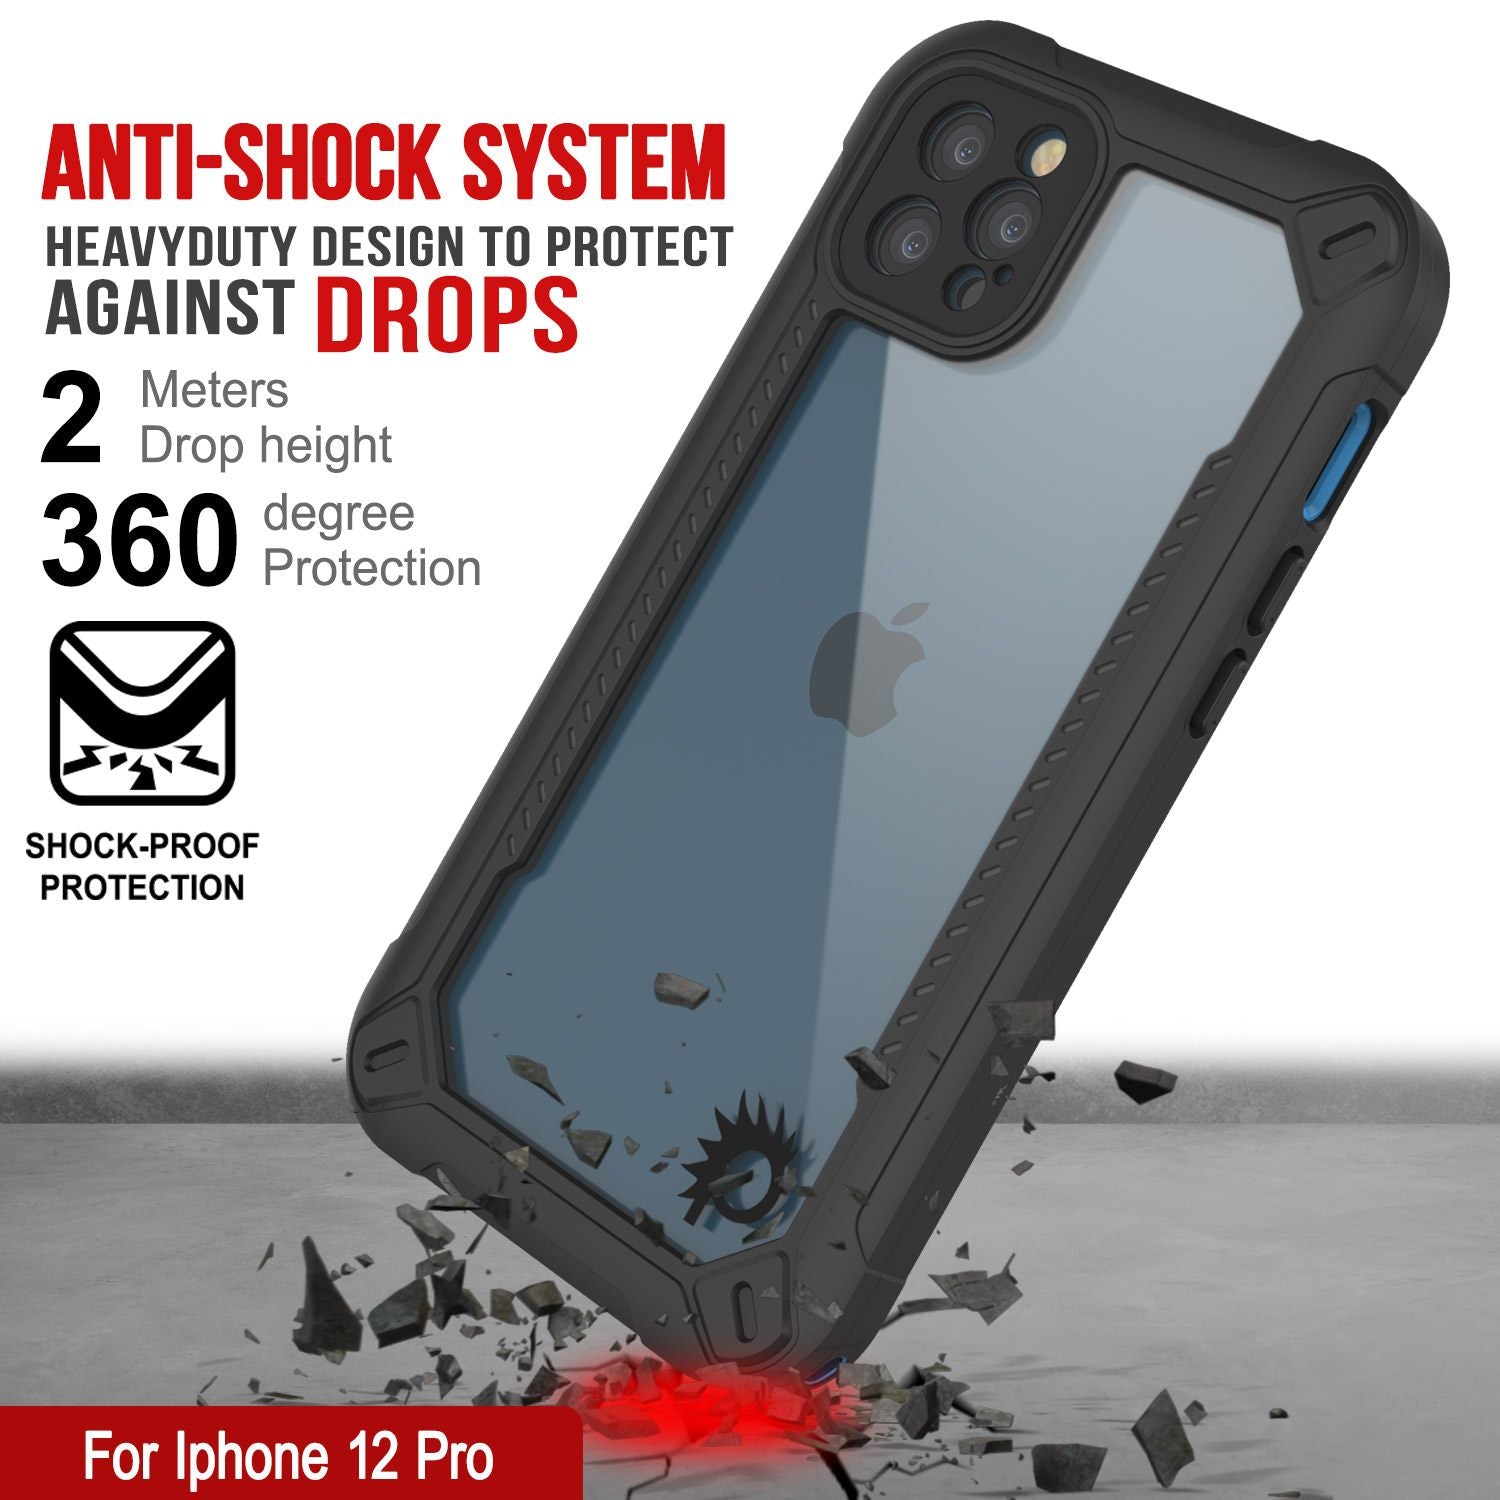 iPhone 12 Pro Waterproof IP68 Case, Punkcase [Blue]  [Maximus Series] [Slim Fit] [IP68 Certified] [Shockresistant] Clear Armor Cover with Screen Protector | Ultimate Protection